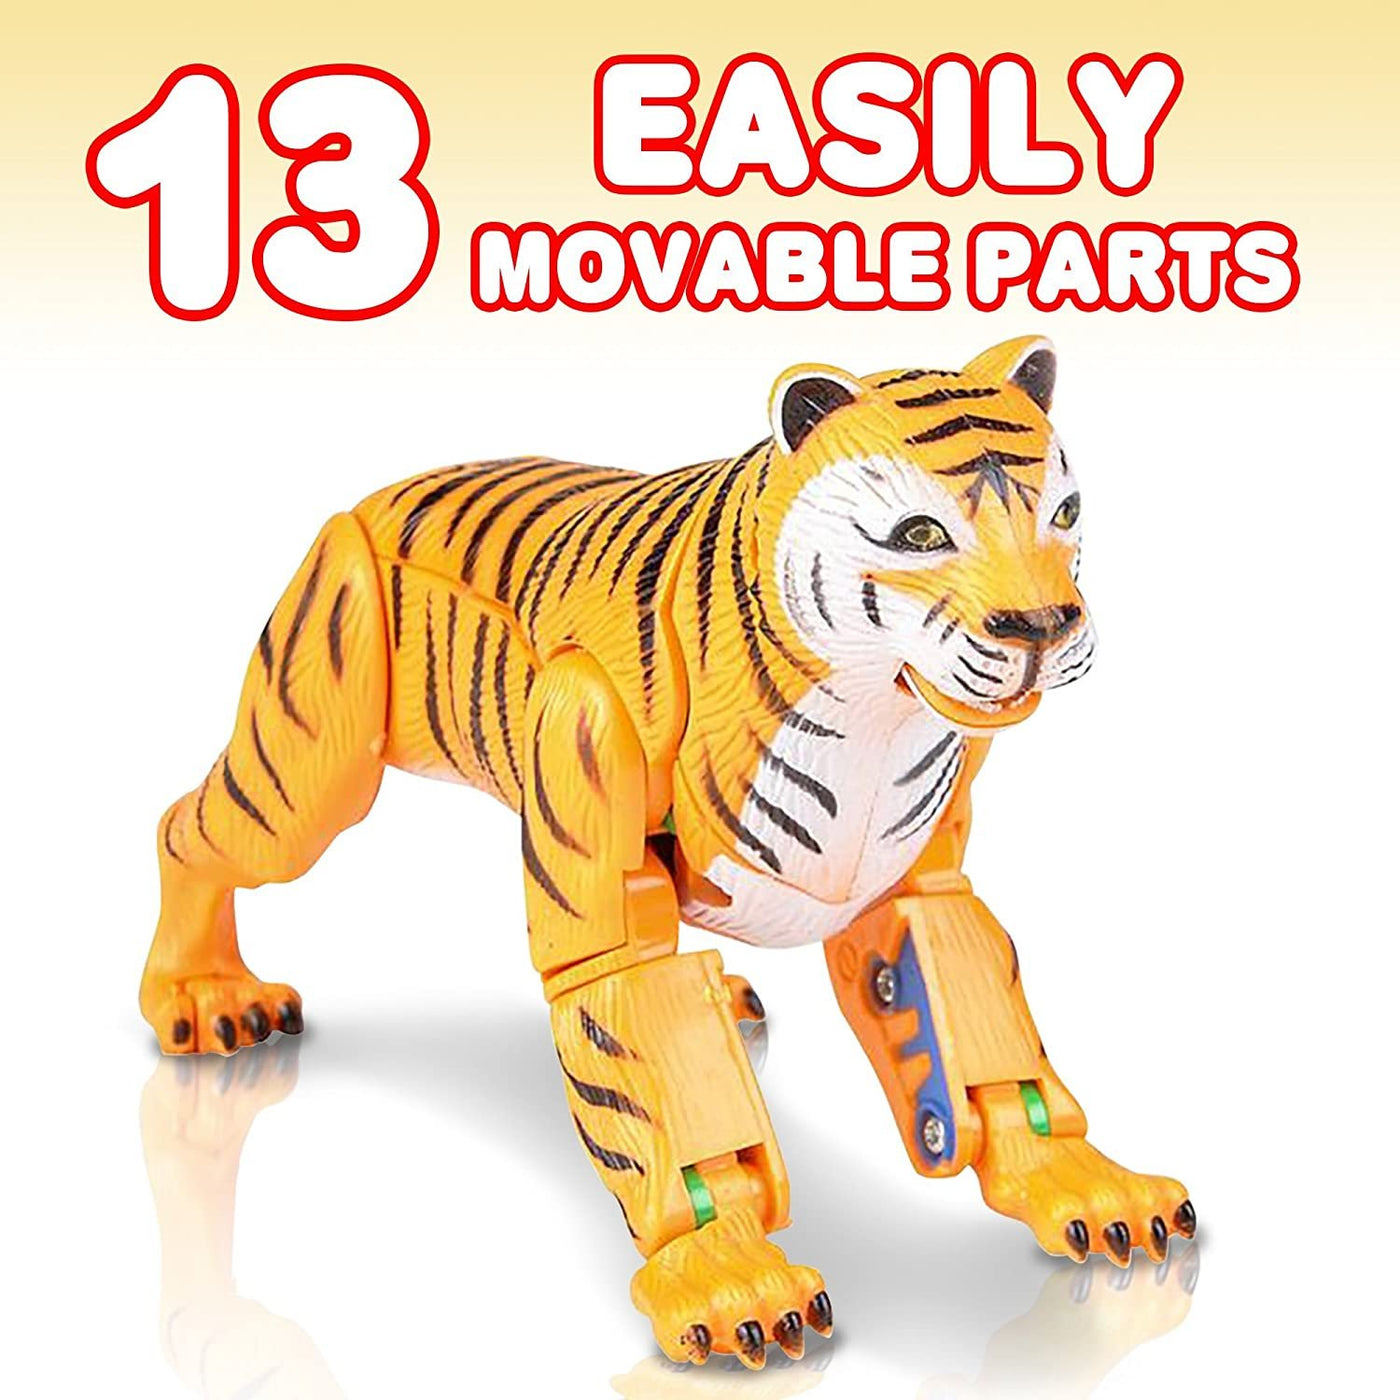 ArtCreativity Tiger Robot Action Figure with 13 Moving Parts, Cool Tiger Toy for Kids, Cool Contest or Carnival Prize, Fun Birthday Gift Idea for Boys and Girls